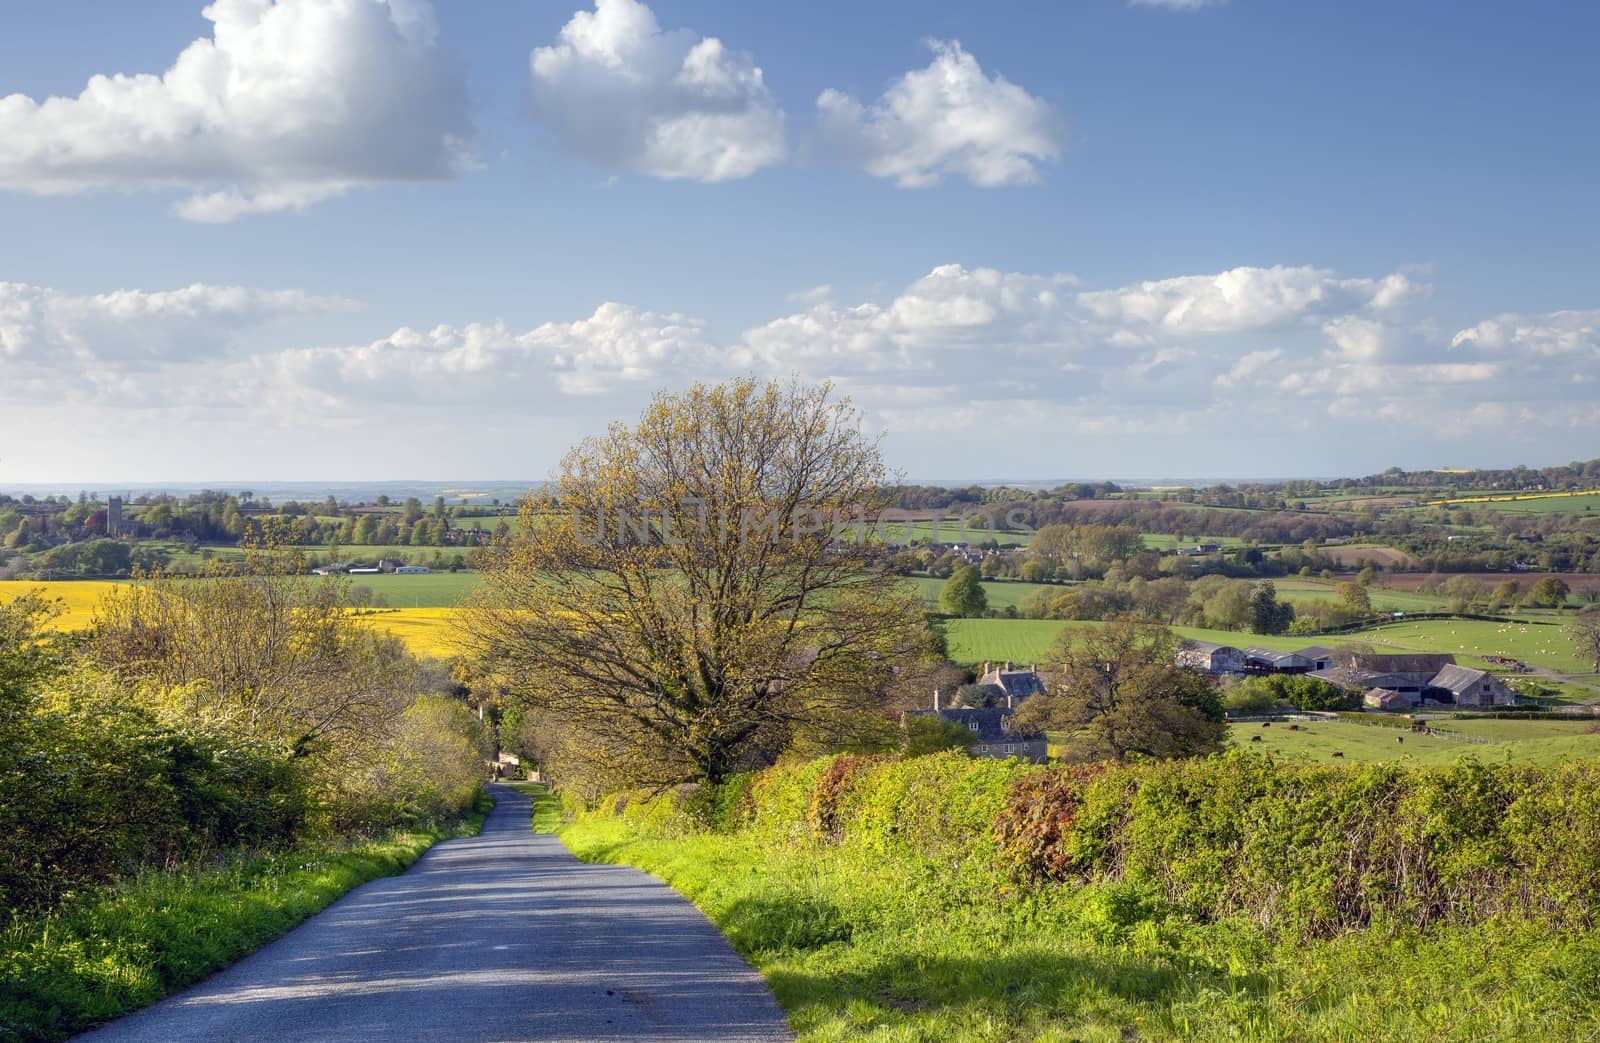 Rural Gloucesteshire, England by andrewroland